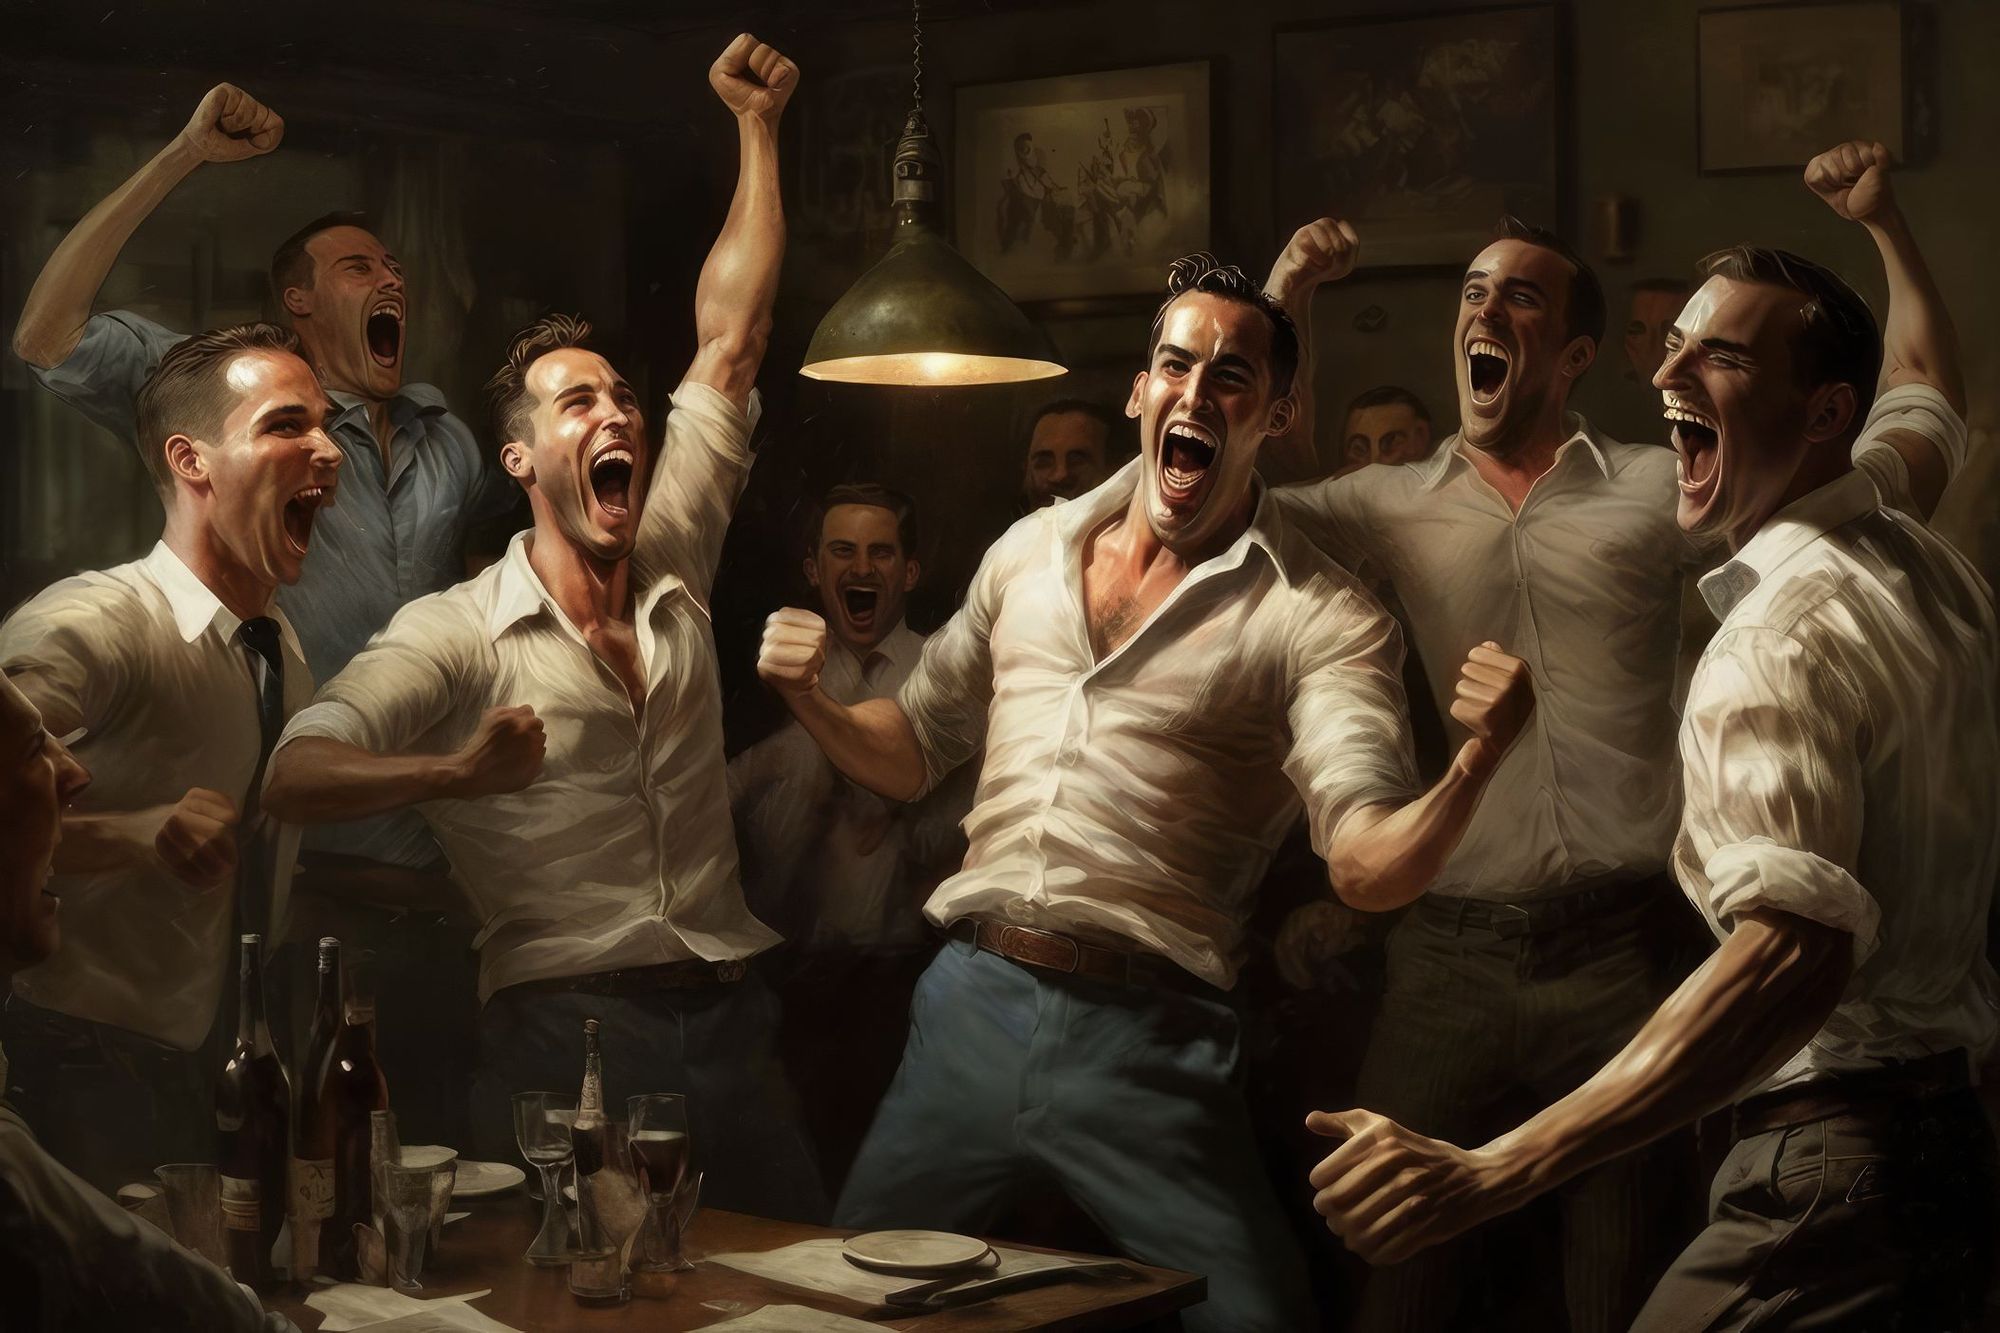 A group of bawling business men wearing white shirts celebrating in a bar or restaurant